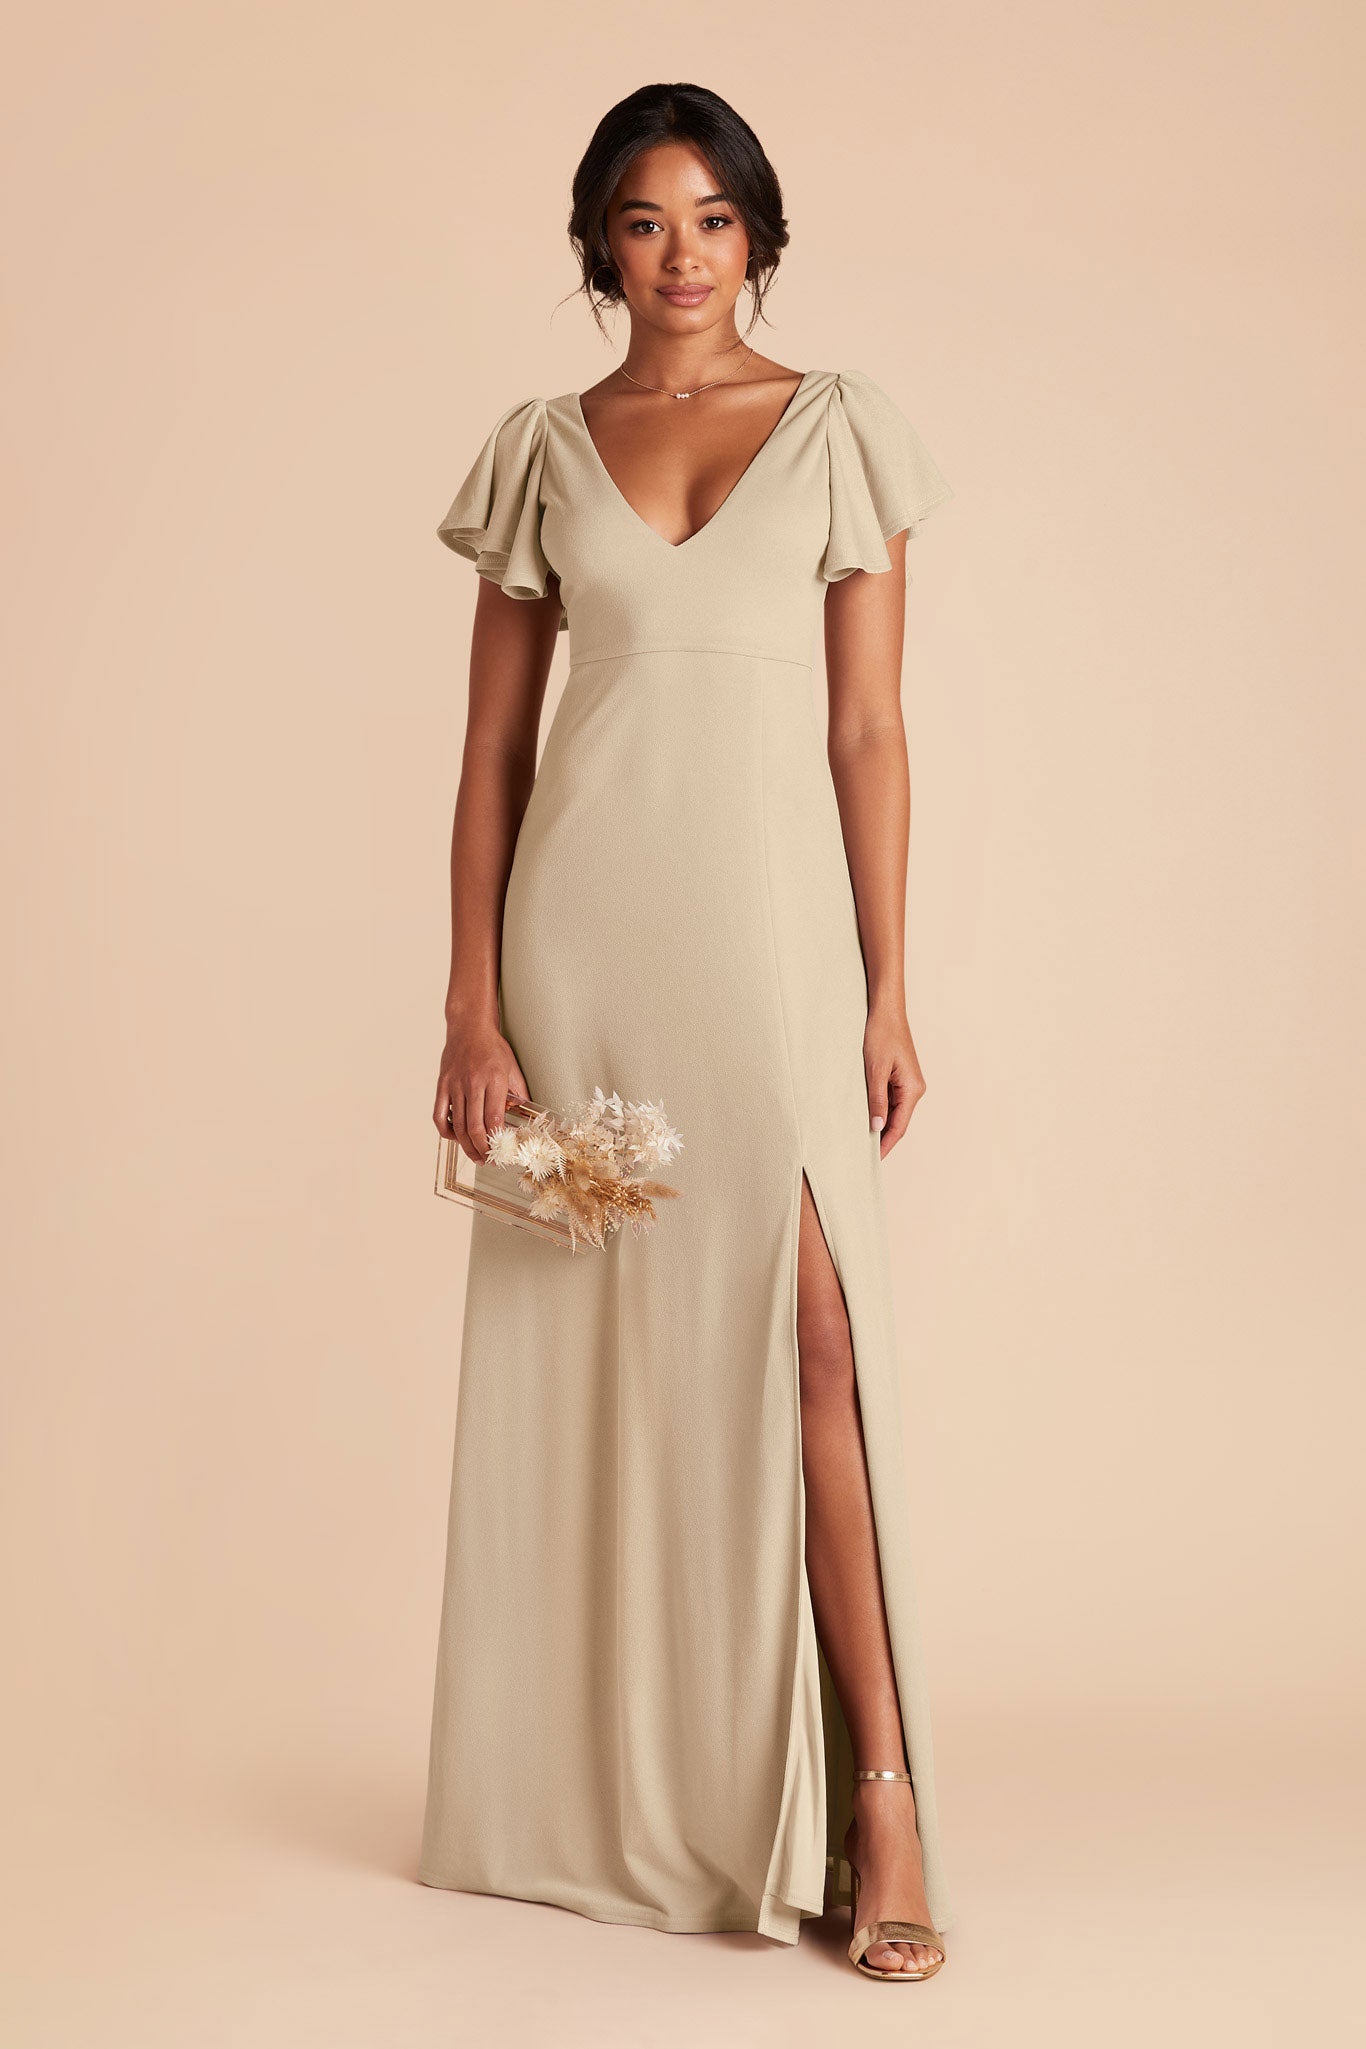 Neutral Champagne Crepe Dress By Birdy Grey